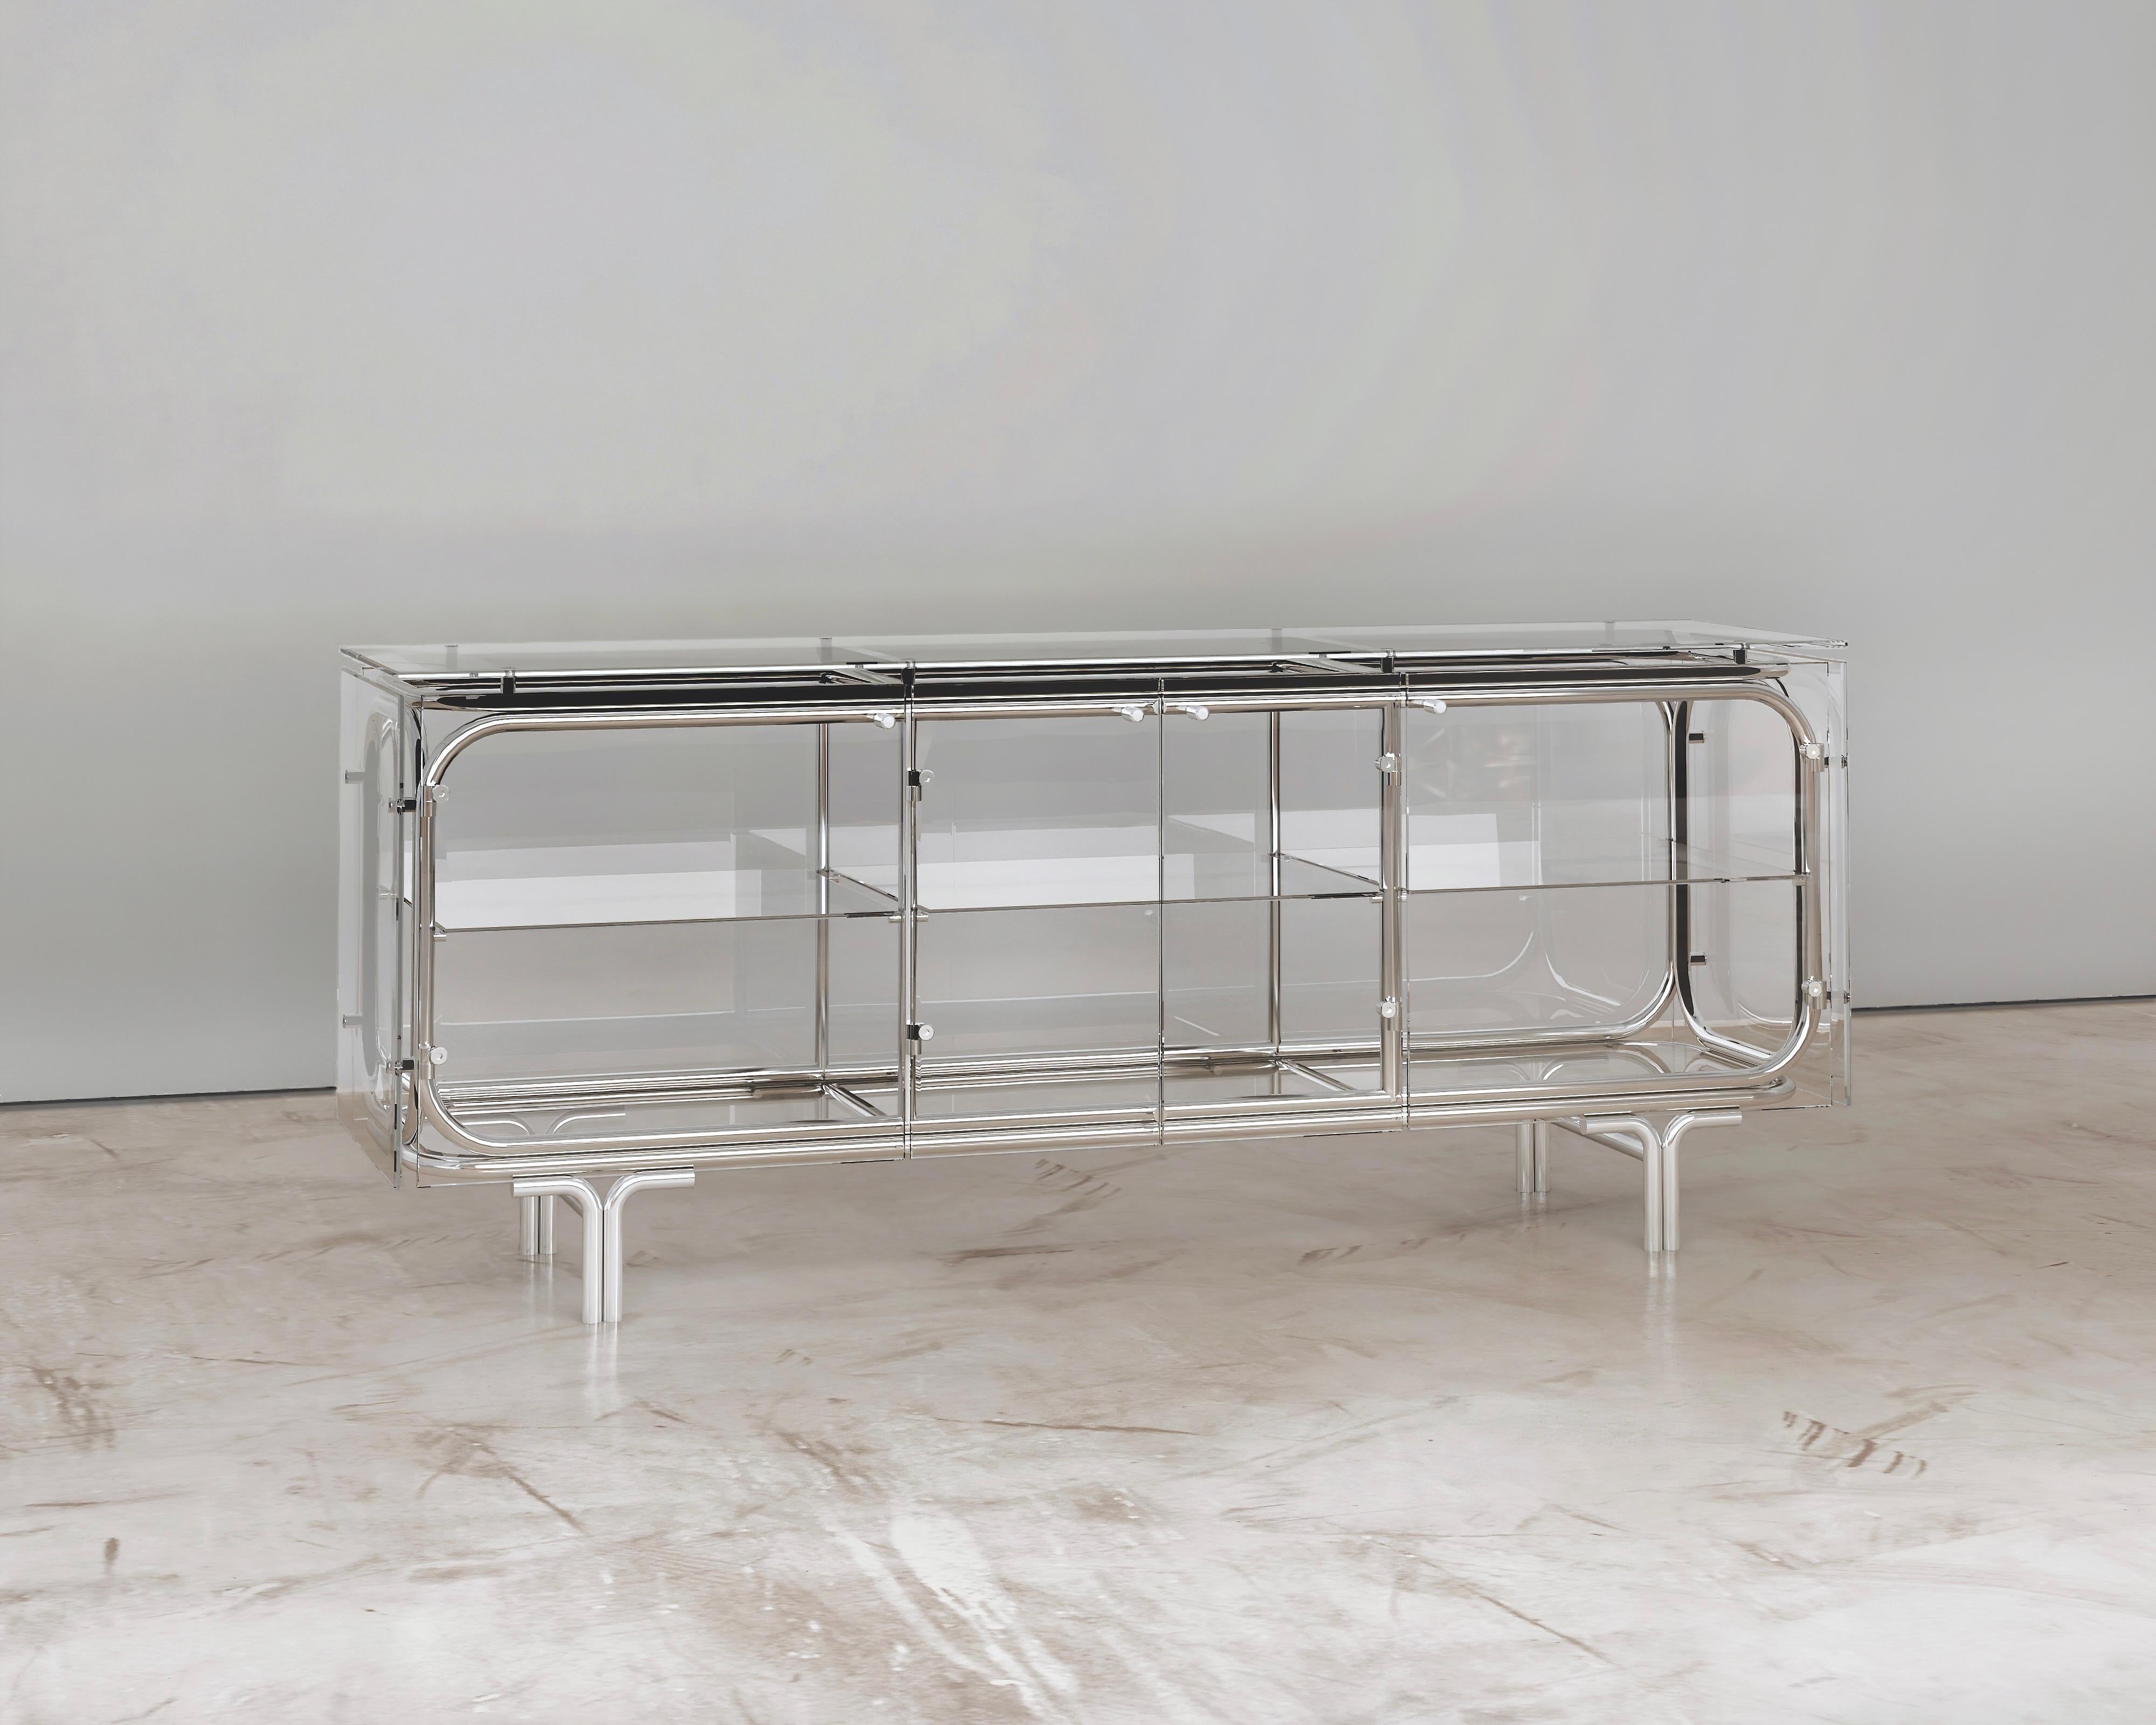 Canadian Cabinet With Starphire Glass & Stainless Steel Contemporary Functional Art  For Sale